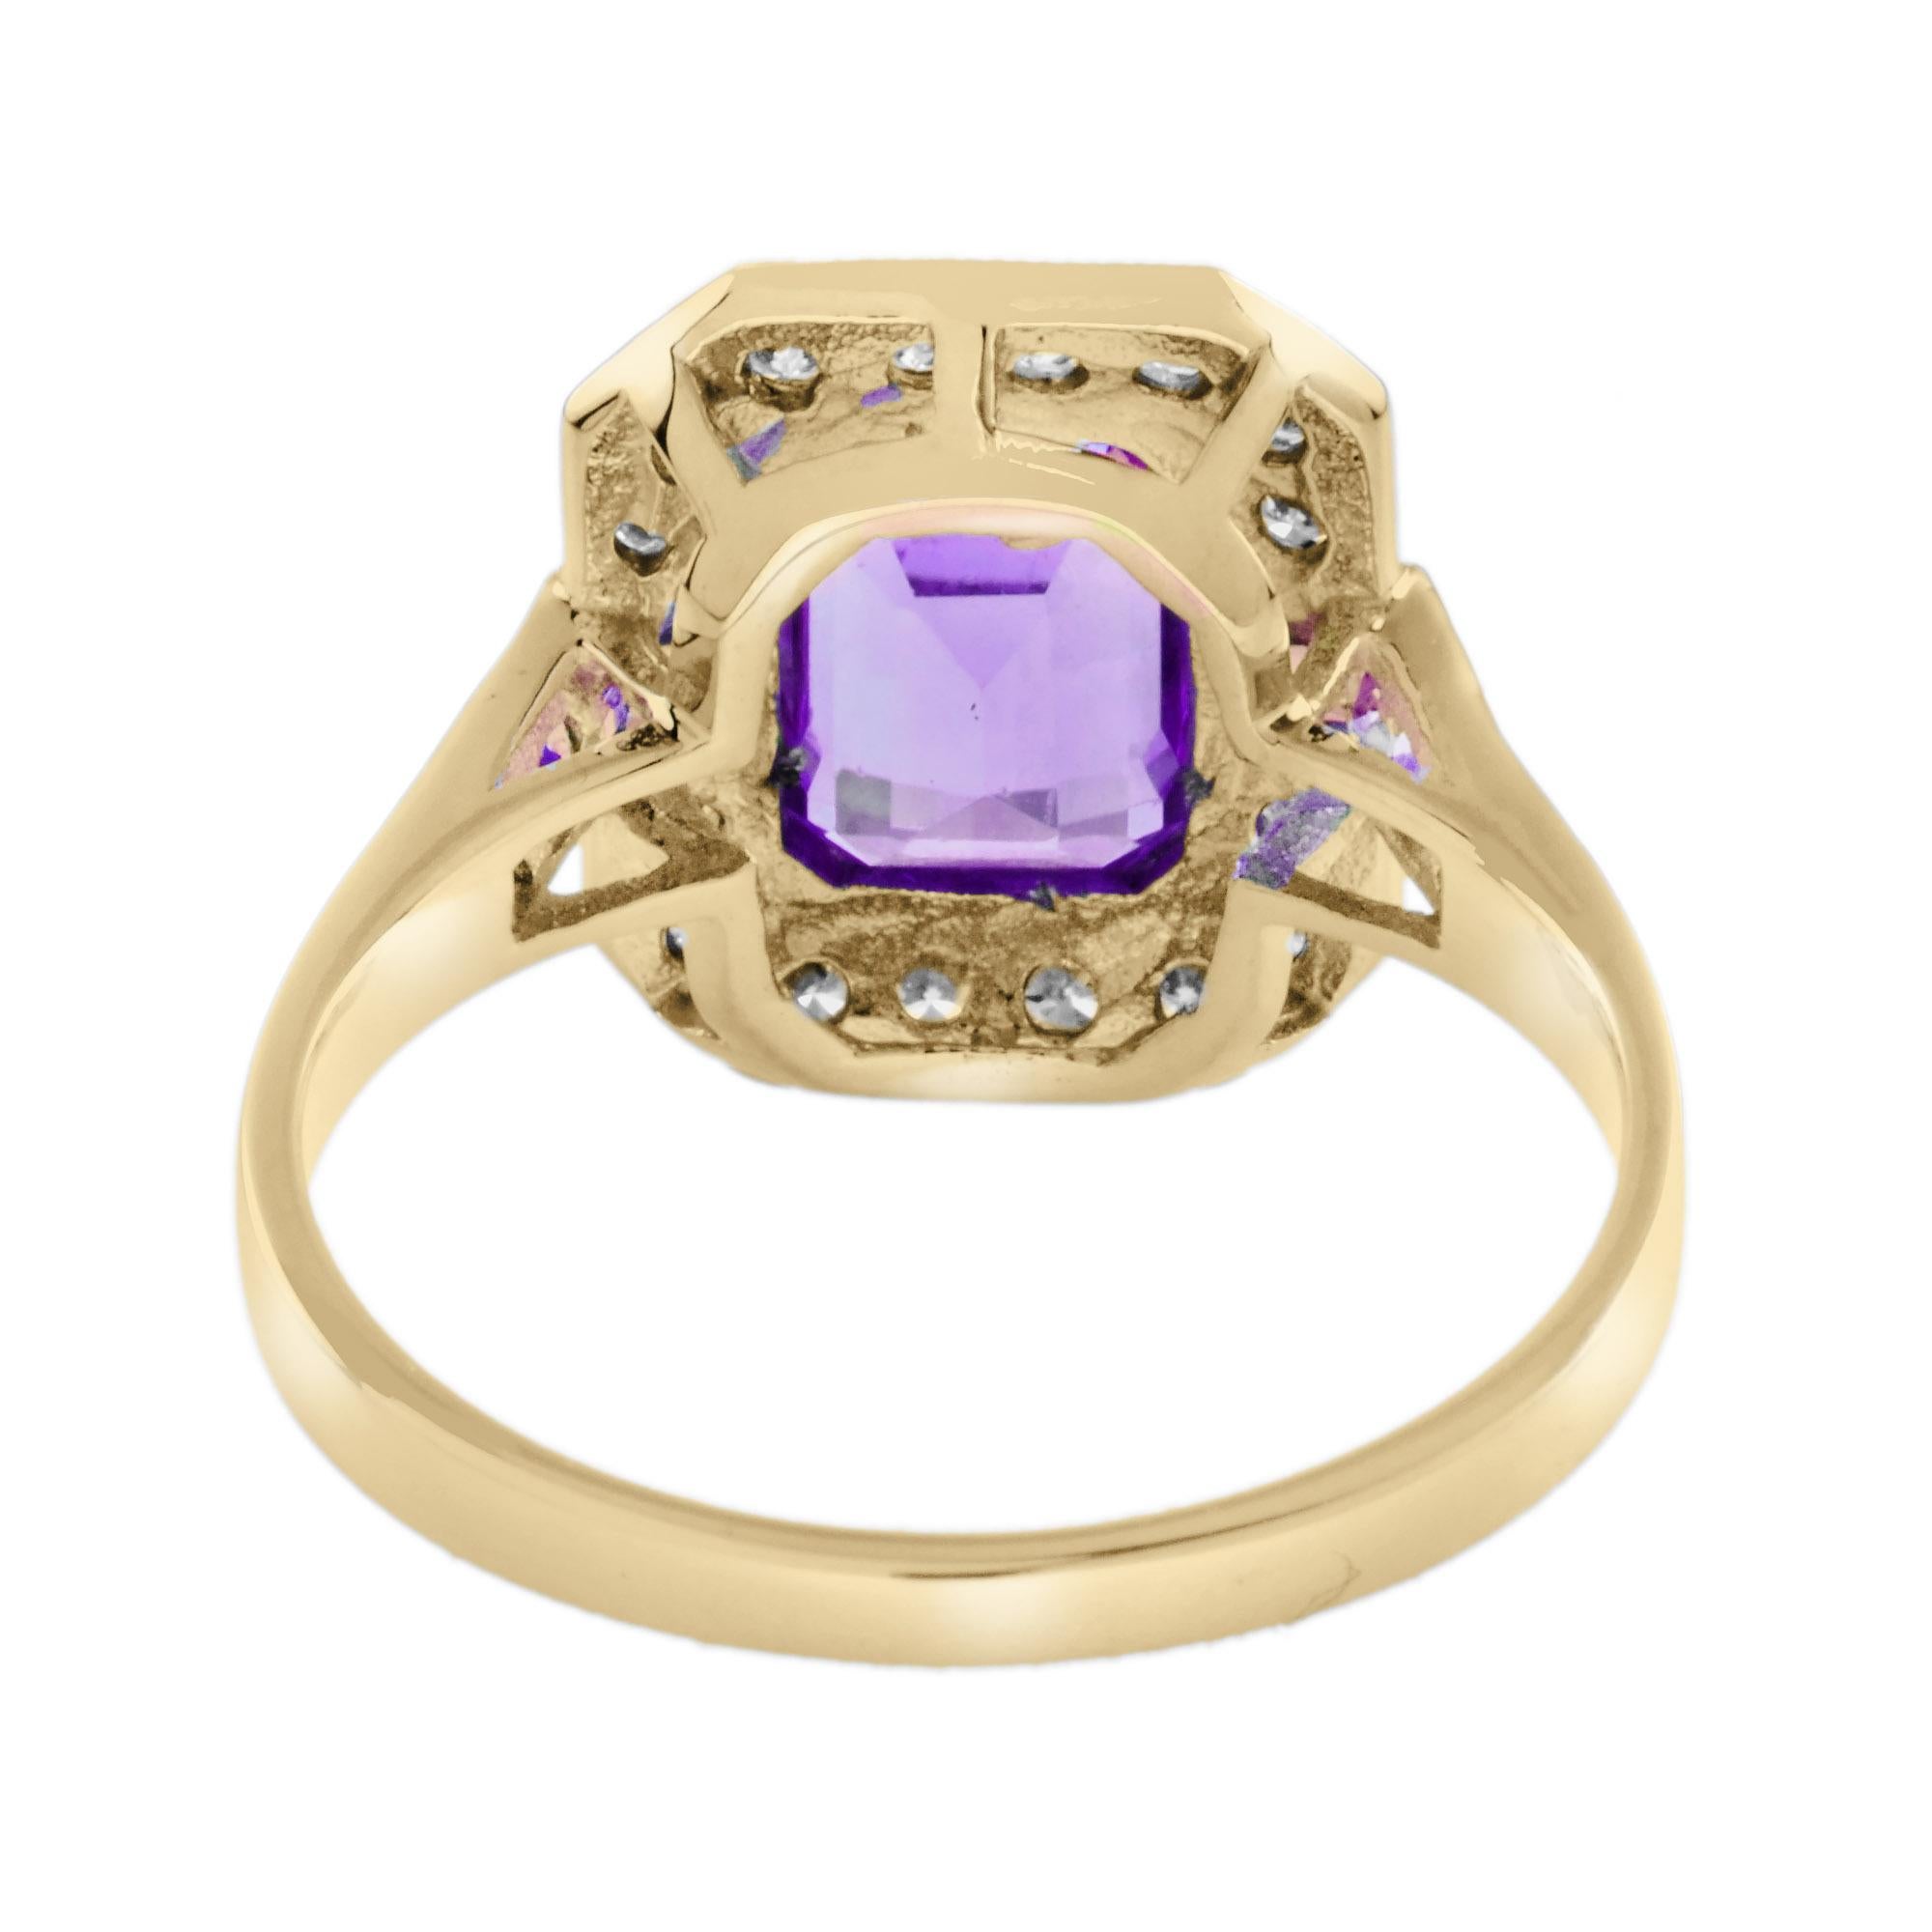 Emerald Cut Amethyst and Diamond Art Deco Style Halo Ring in 9K Yellow Gold 1